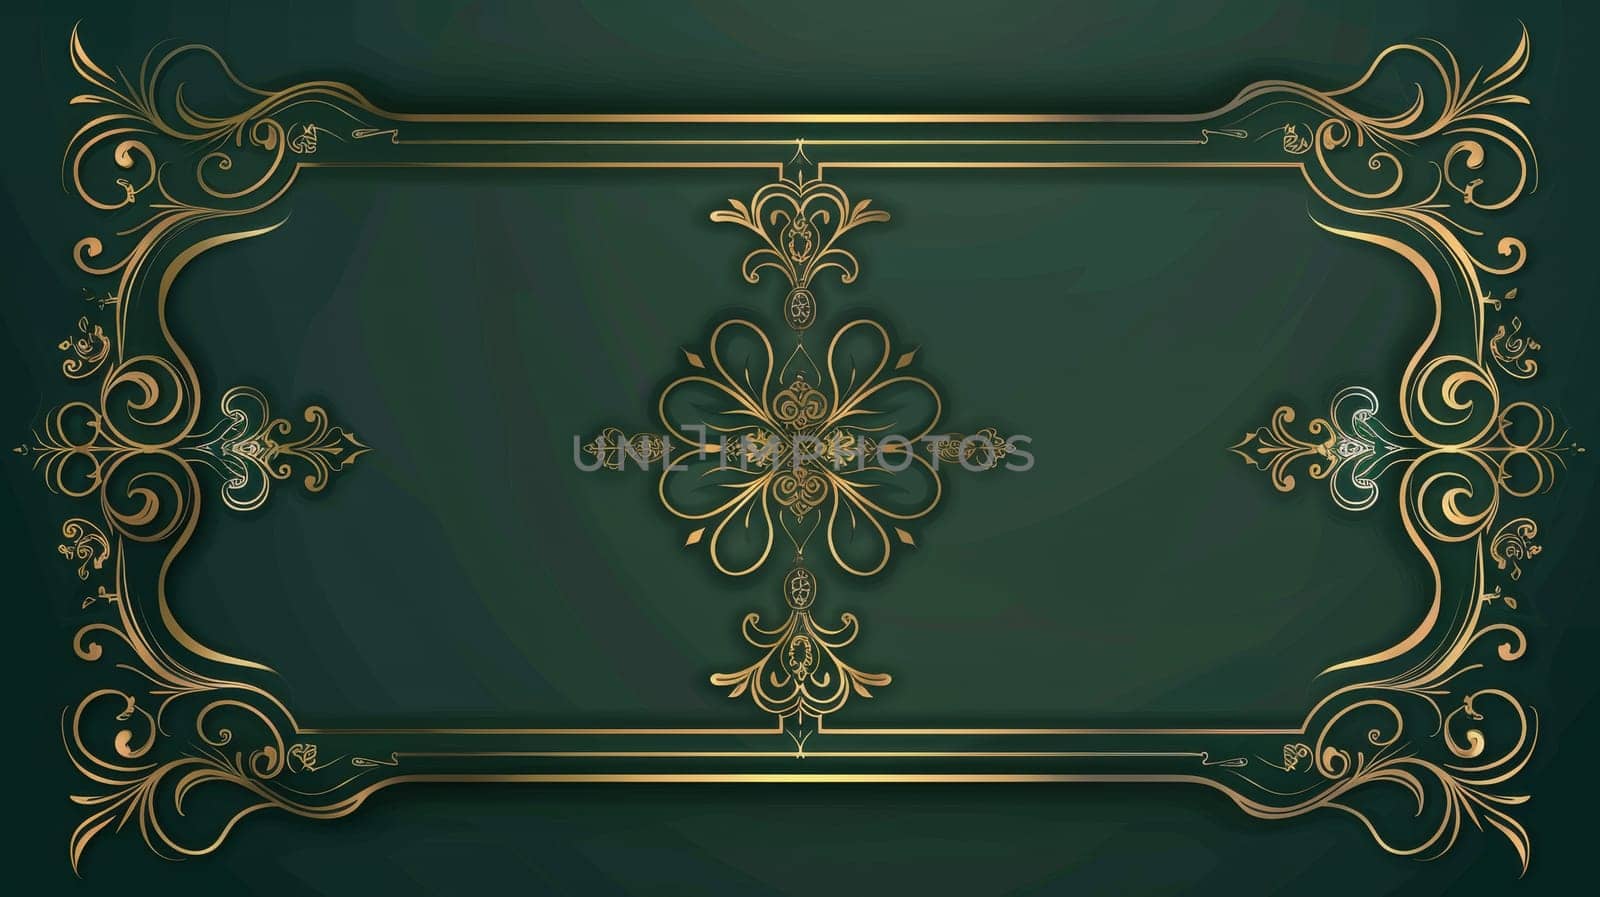 Art nouveau classic antique design on dark green background. The best illustration design for galas, grand openings, art deco events.